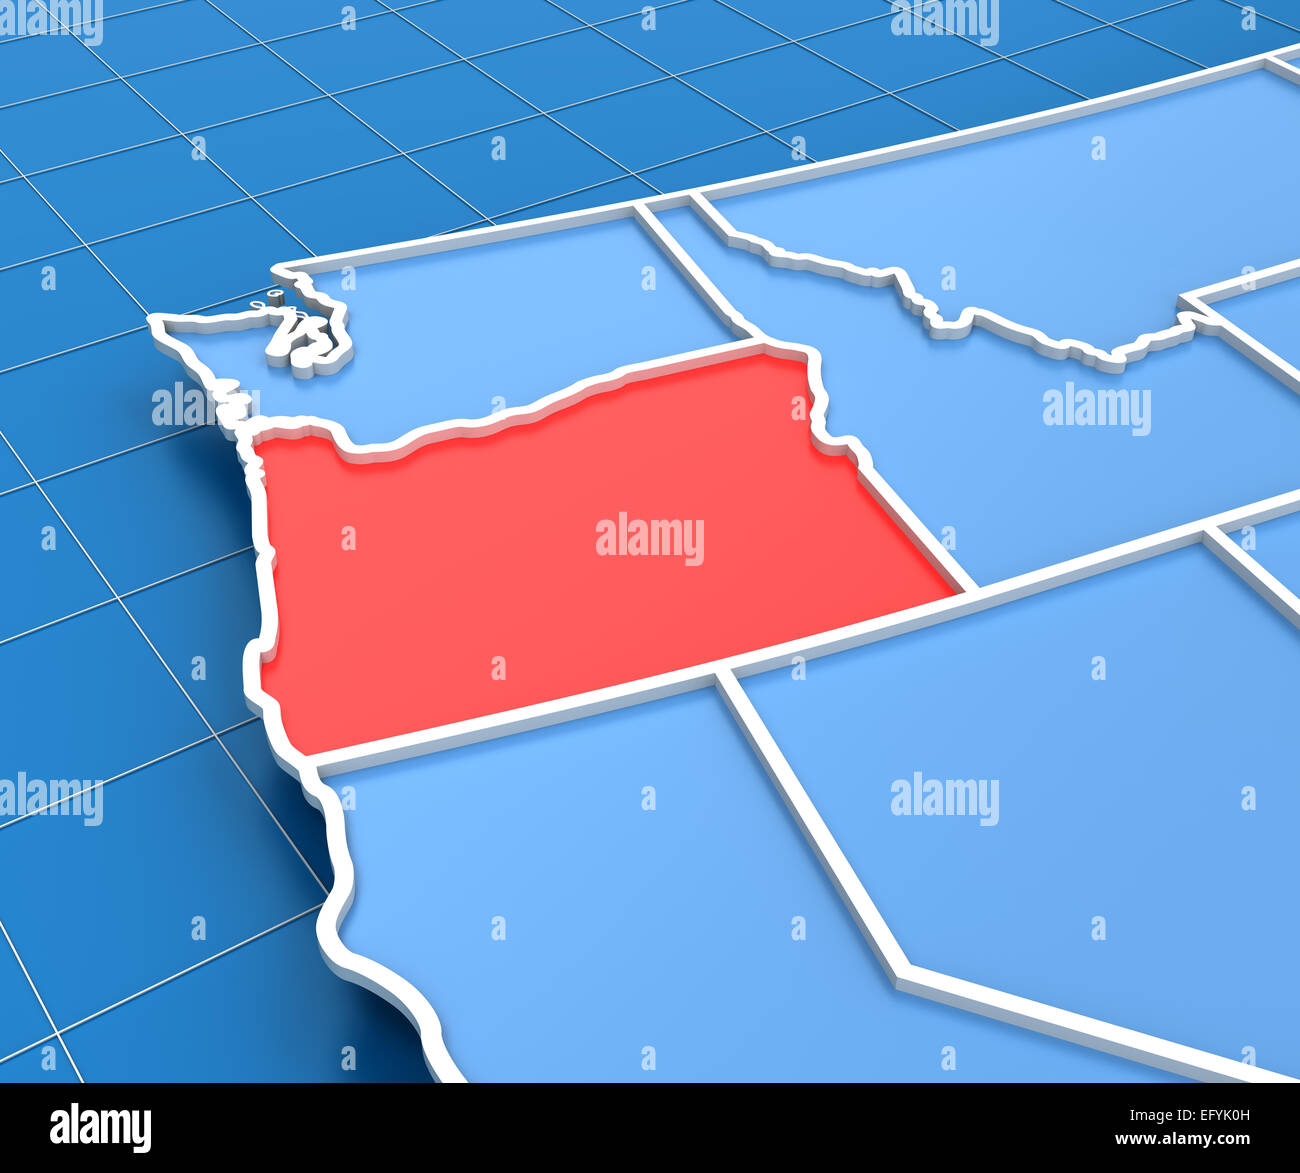 3d render of USA map with Oregon state highlighted Stock Photo